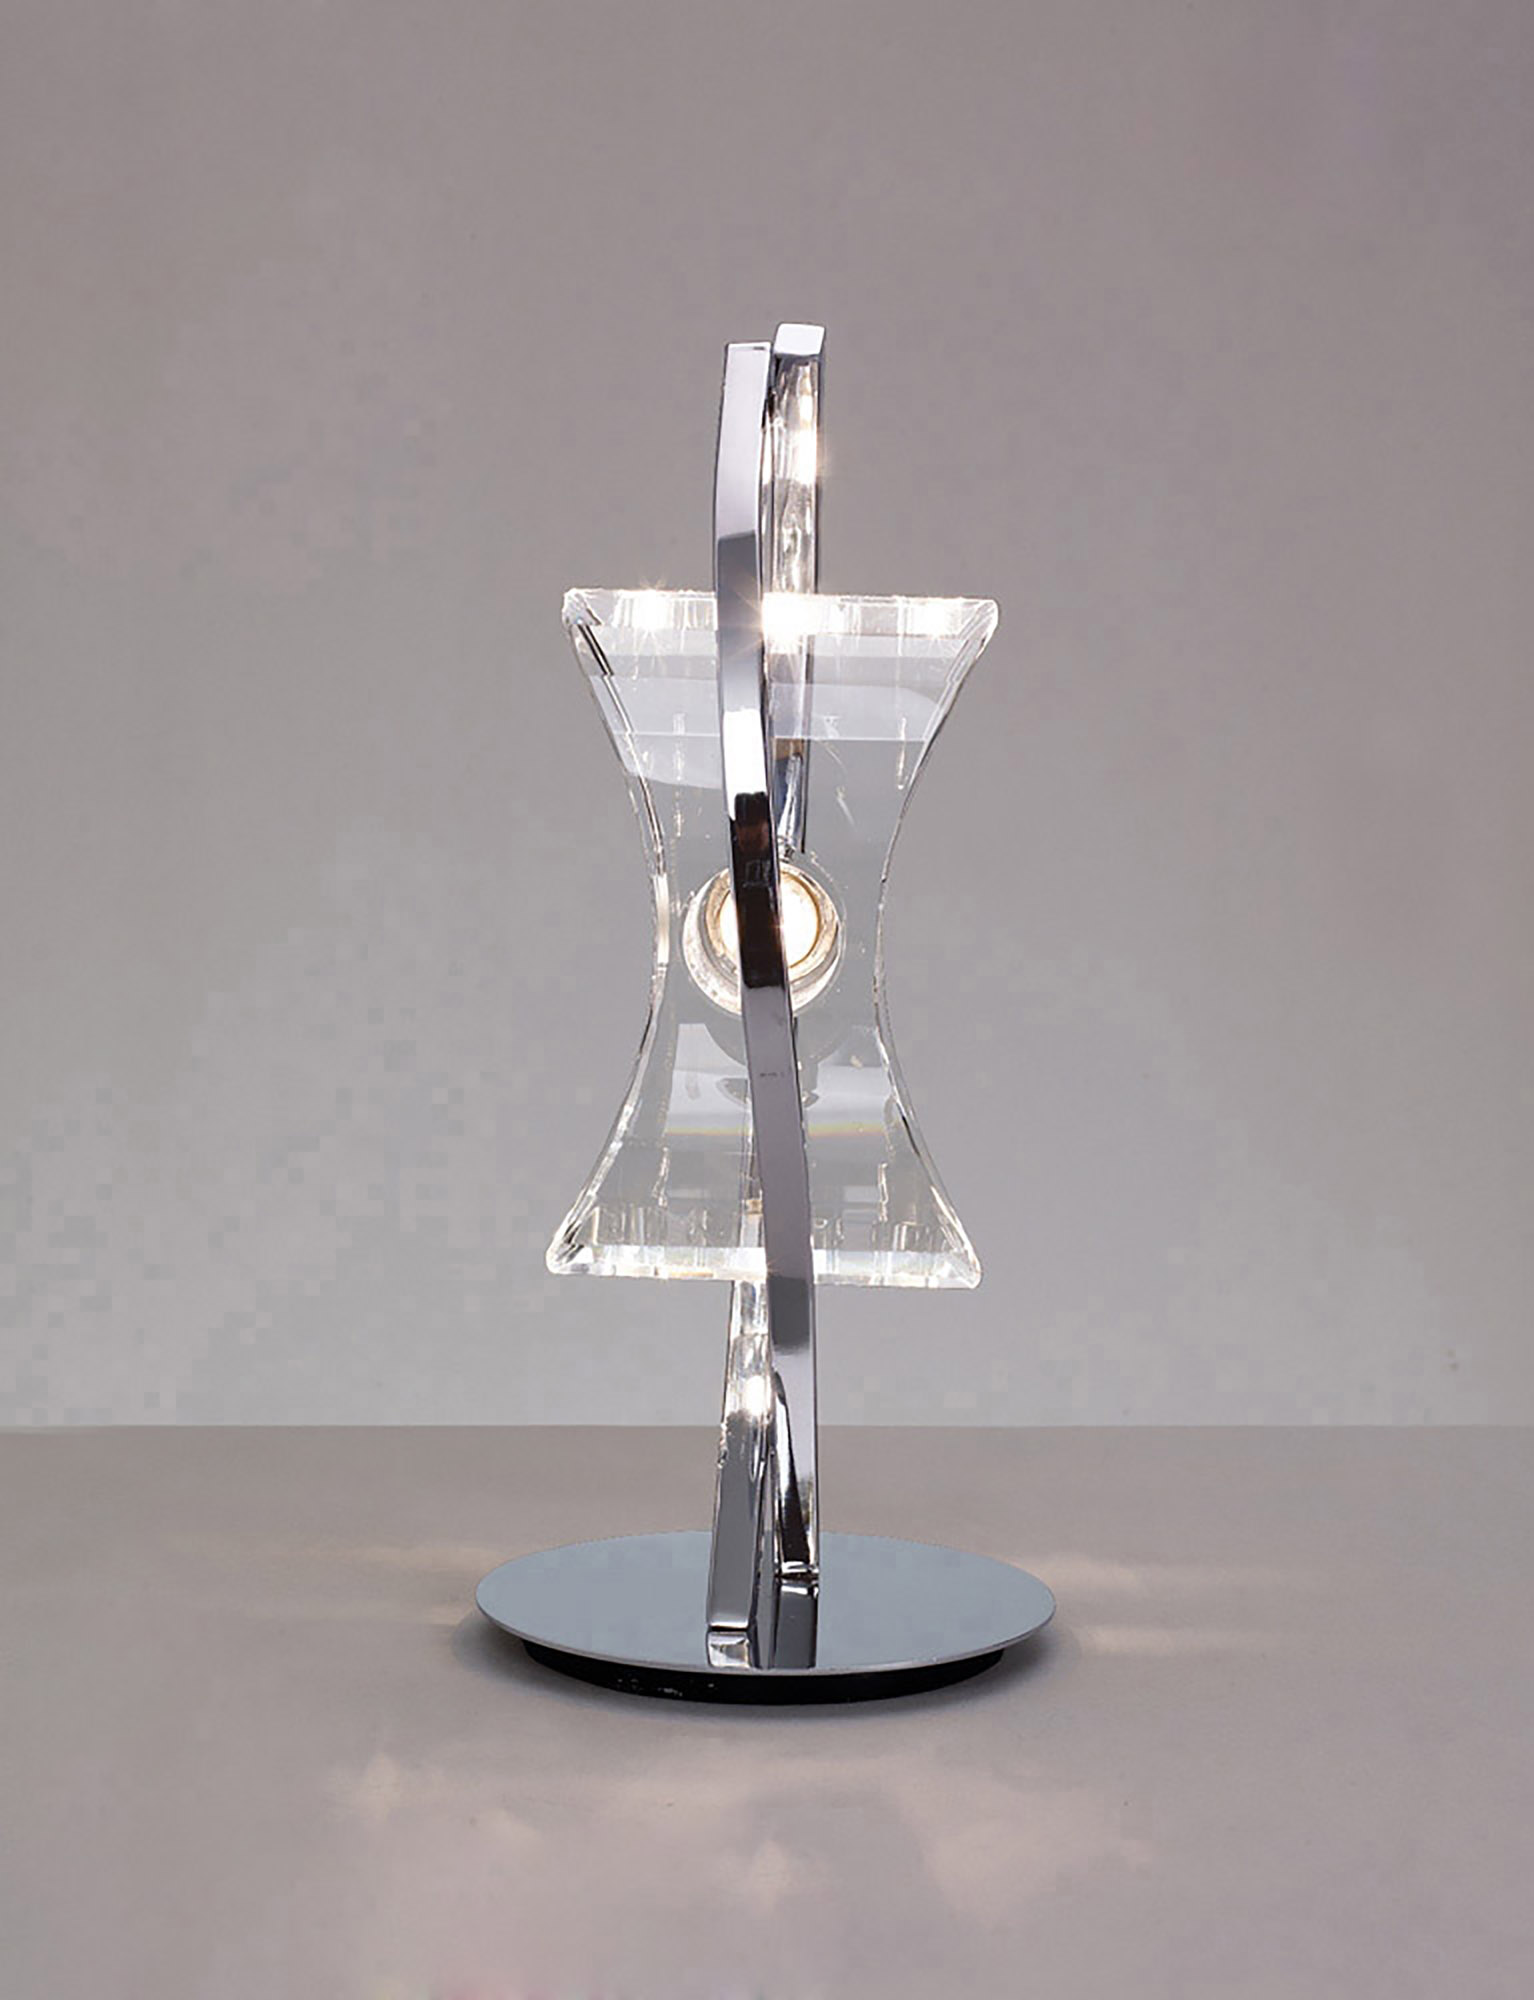 Kromo Polished Chrome Table Lamps Mantra Armed Table Lamps